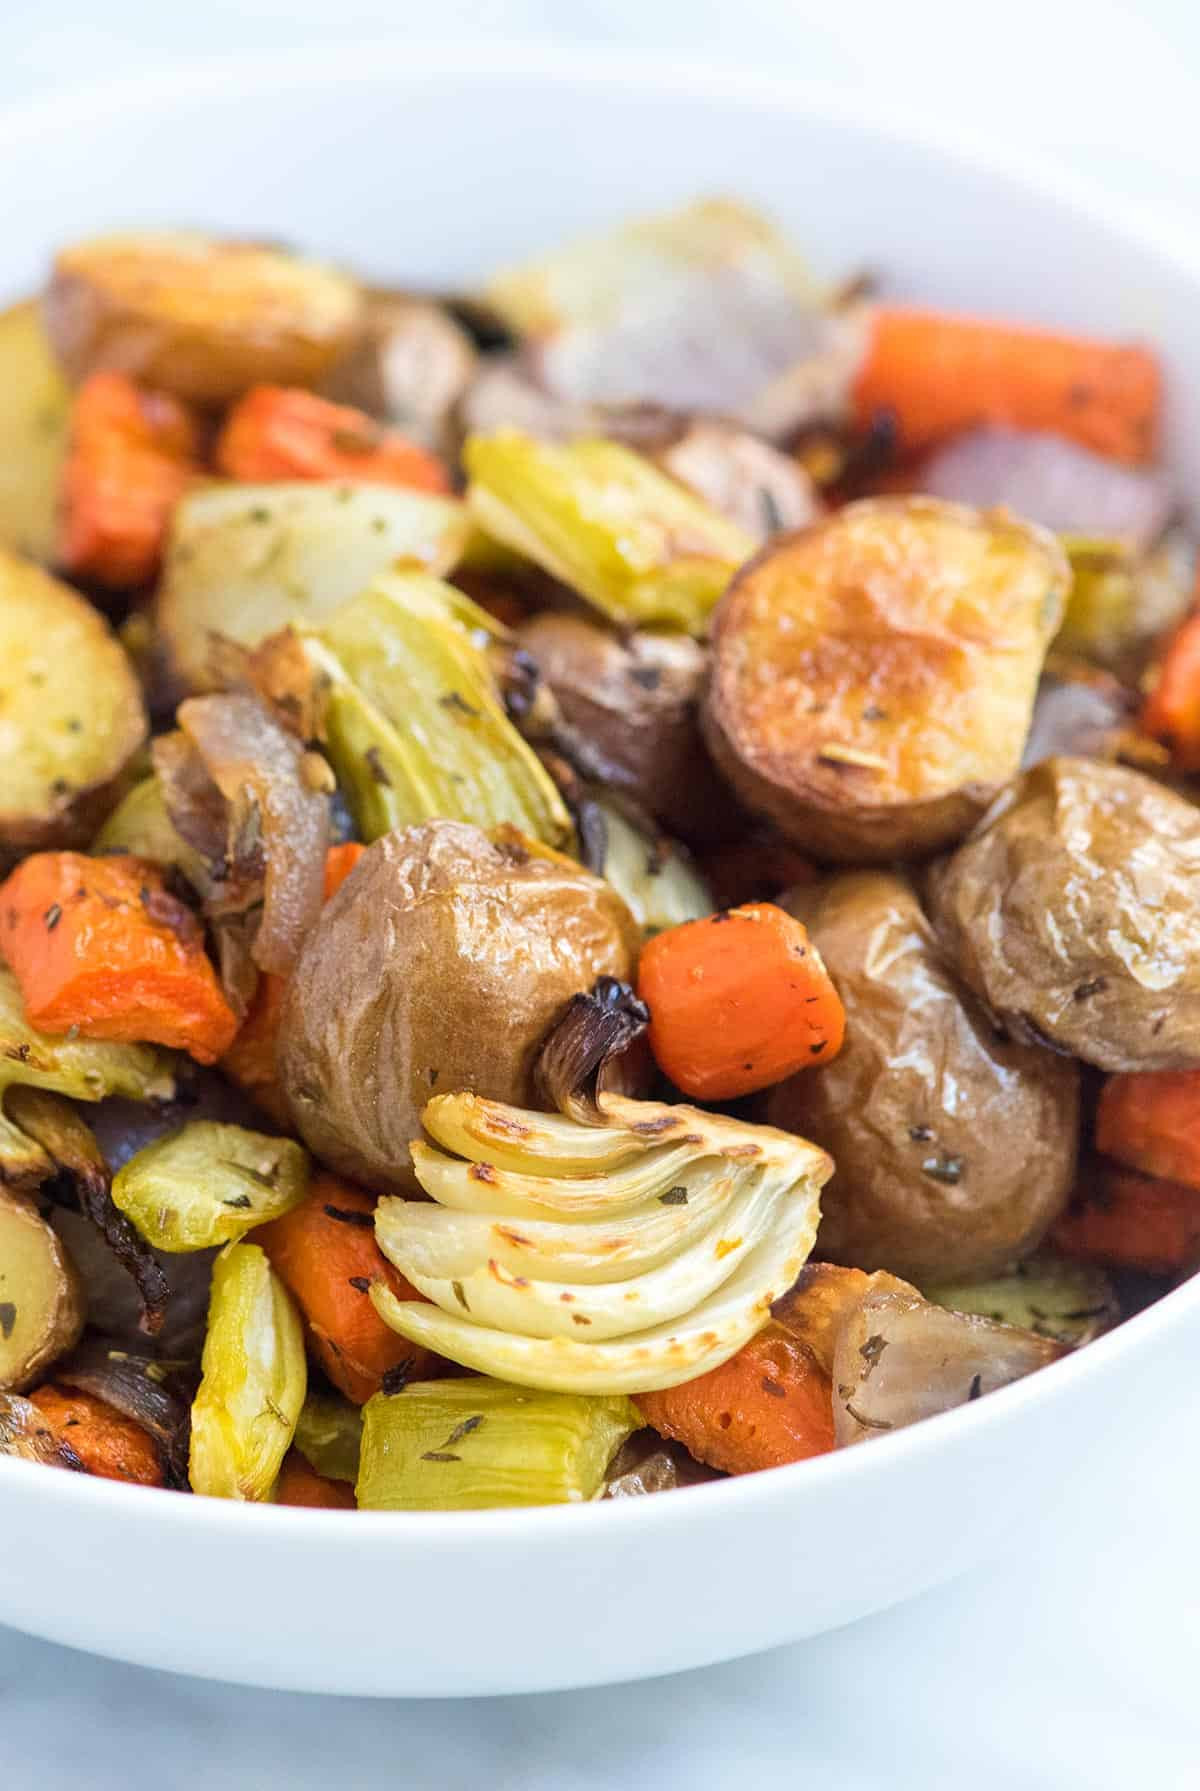 Roasted Vegetables In Oven
 Our Favorite Oven Roasted Ve ables Recipe